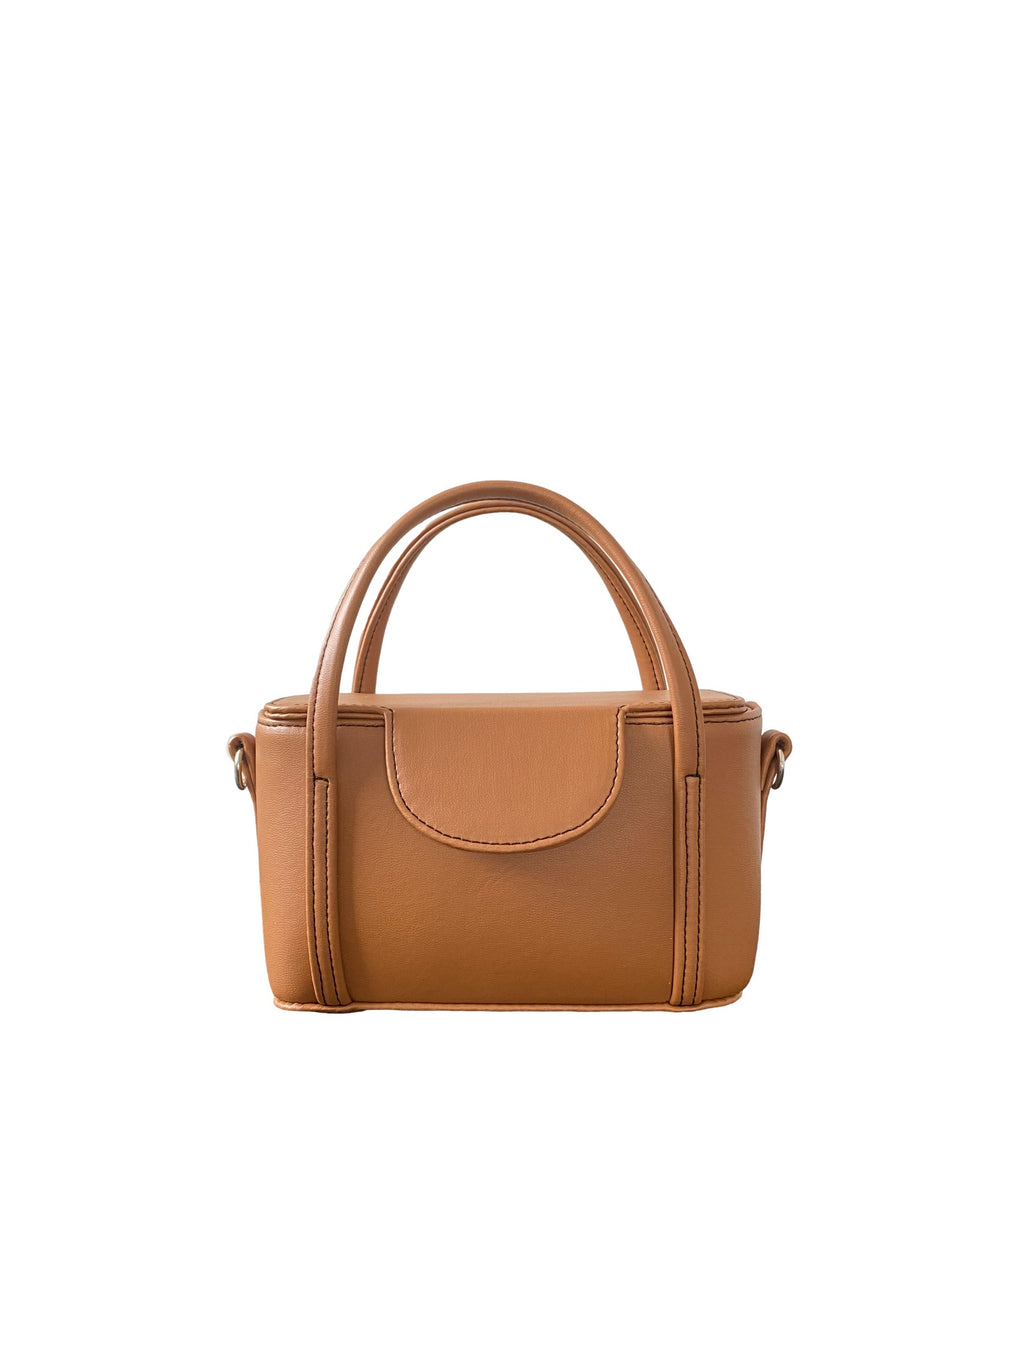 NEW For the Ages Grace Case in Camel Faux Leather and Black Contrast Stitching